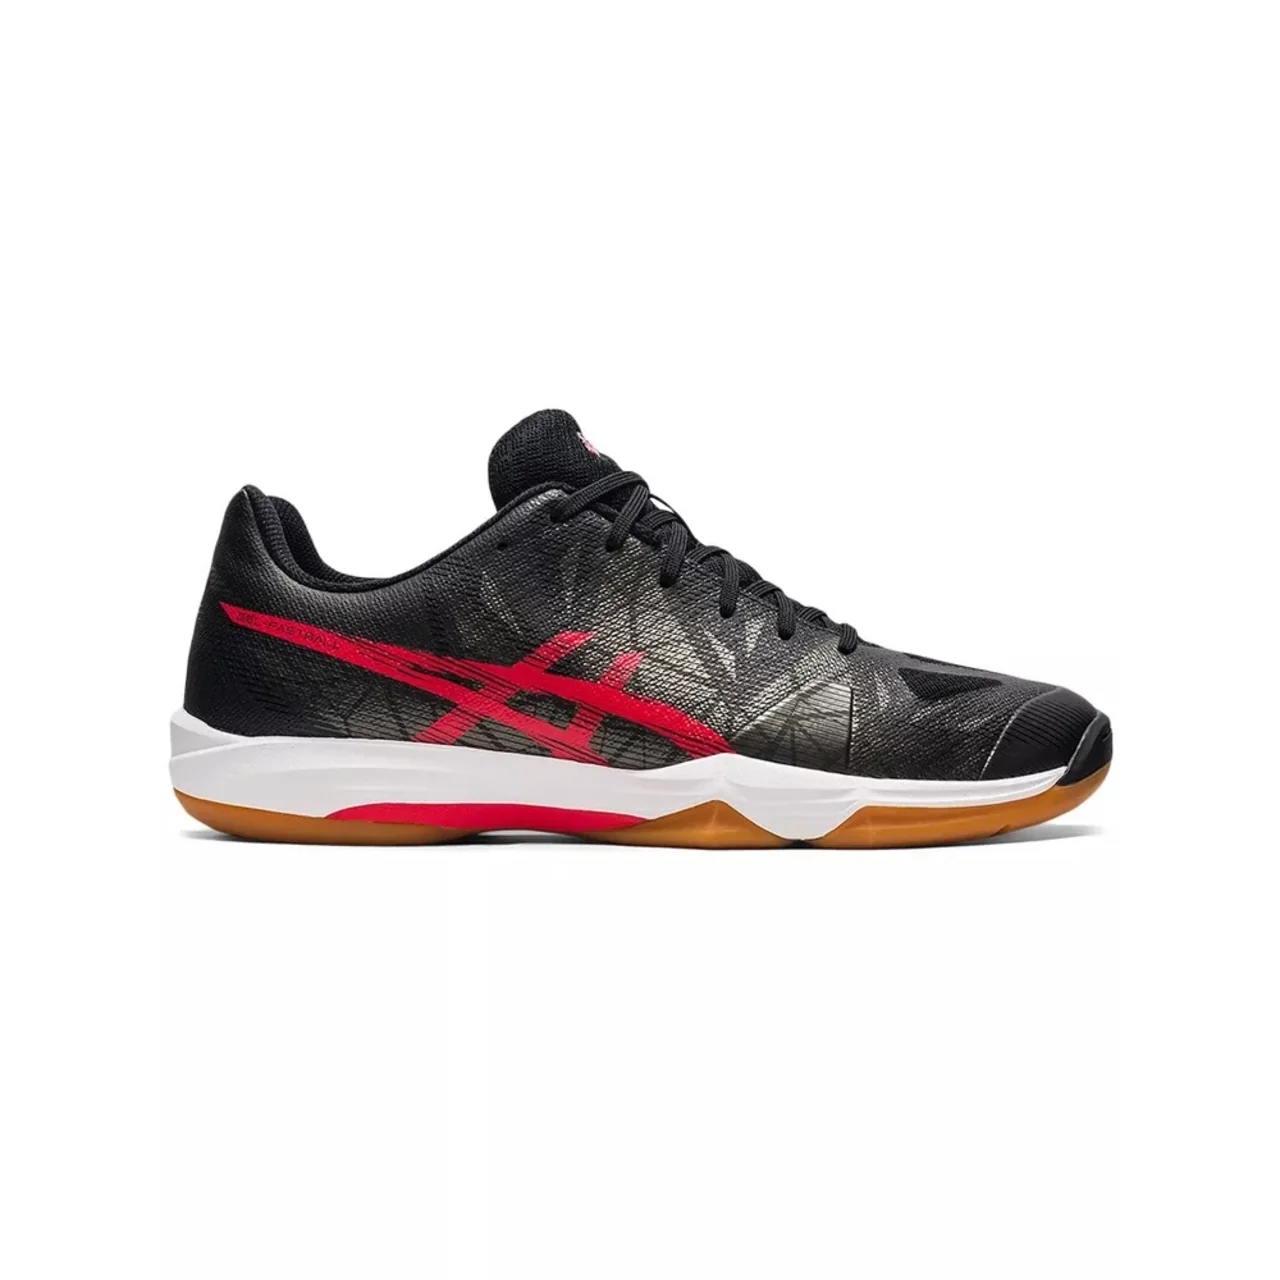 Asics Gel-Fastball 3 Black/Electric Red